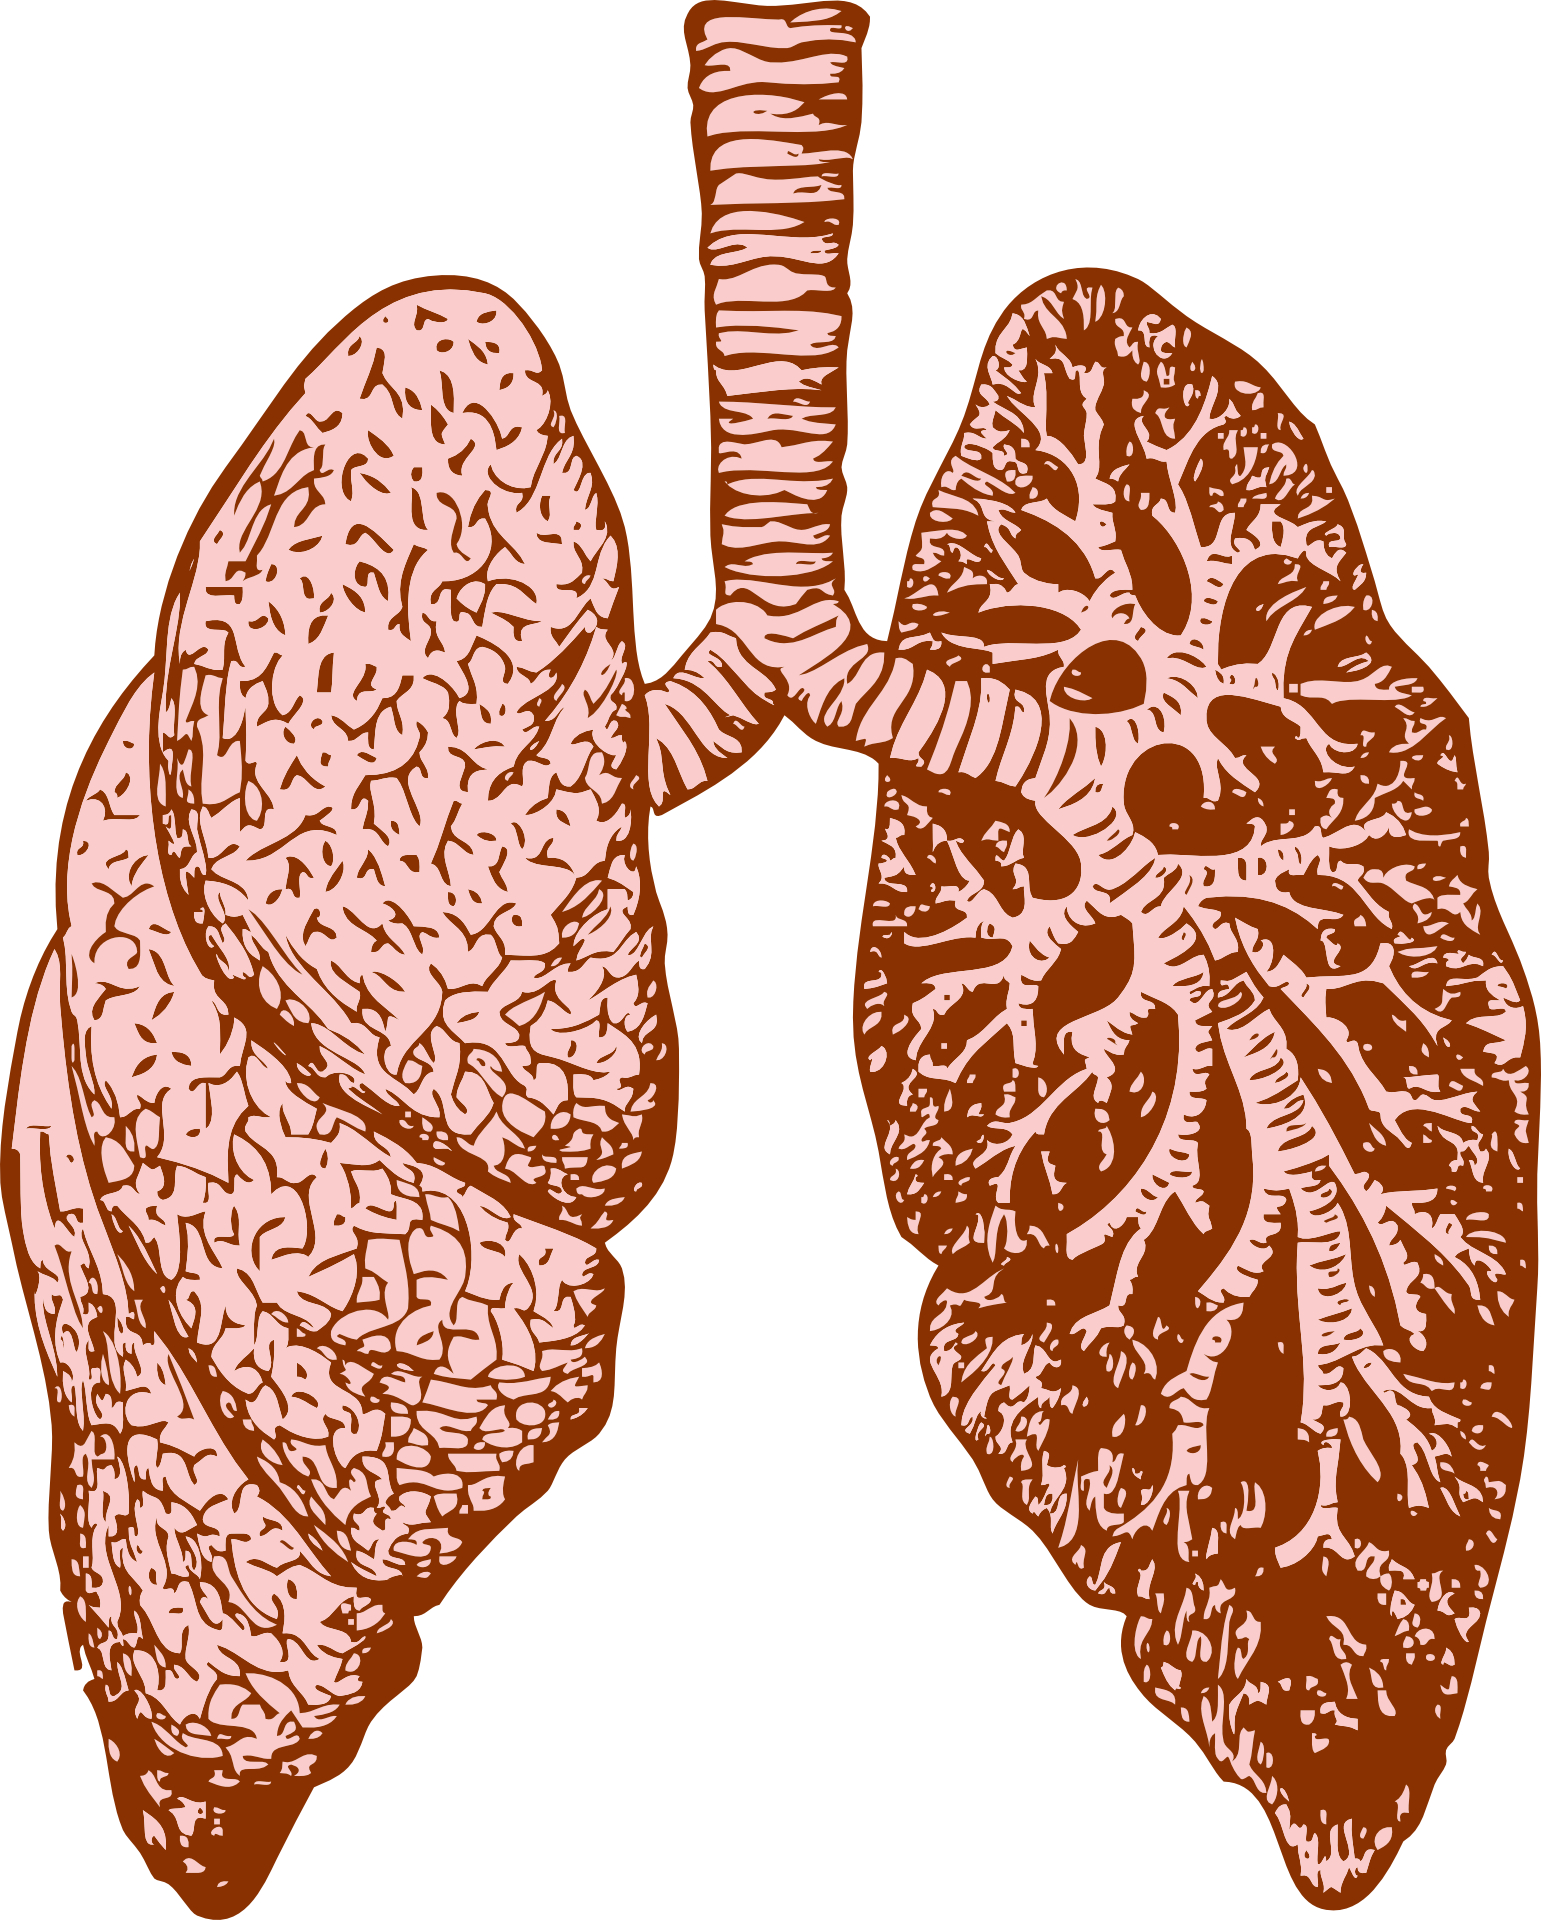 Lung outline clipart